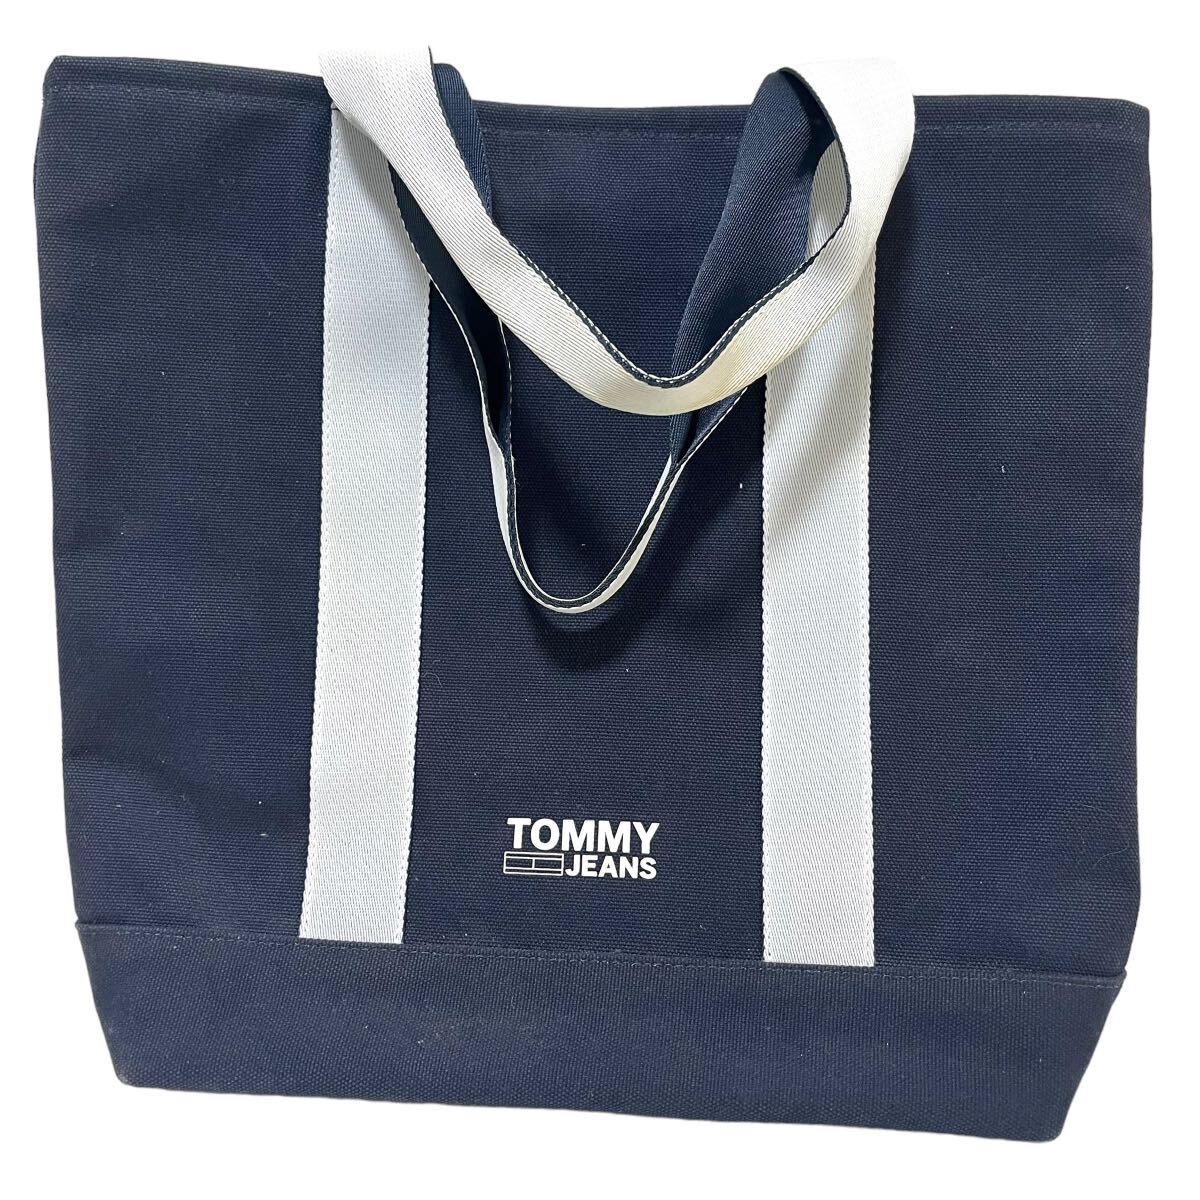 TOMMY JEANS(トミージーンズ)トートバッグ ネイビー_画像1